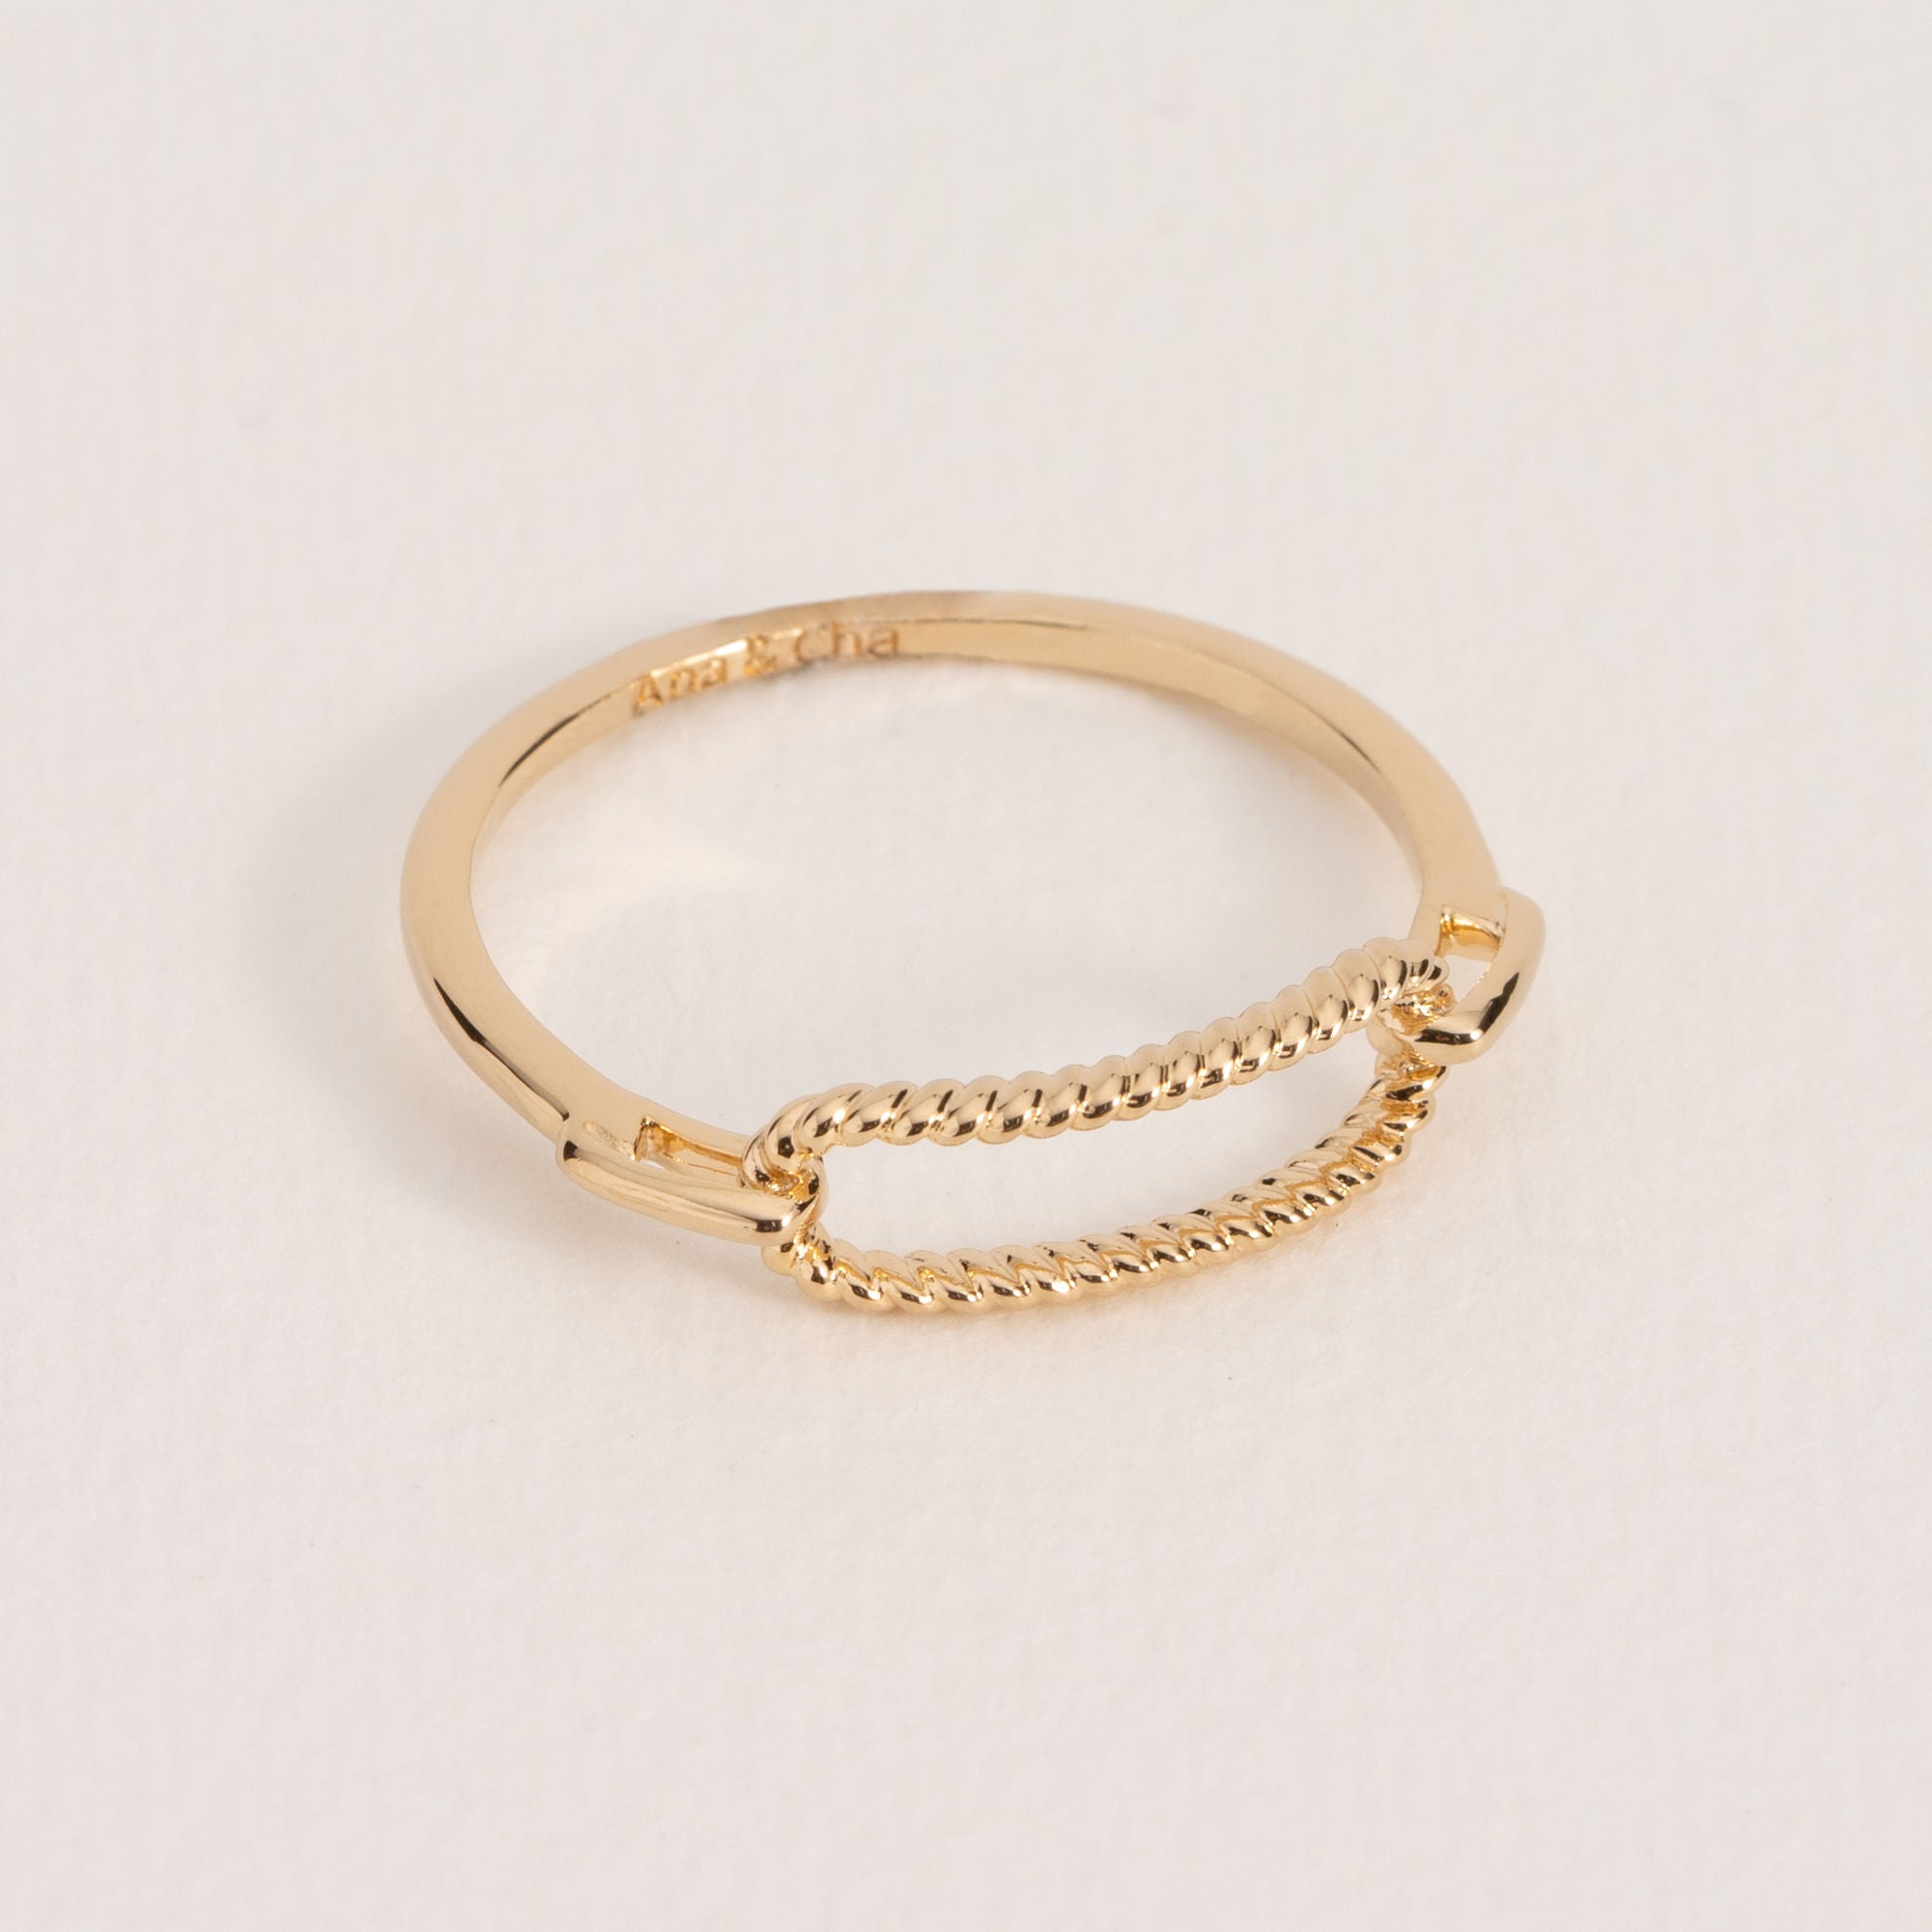 Marine - Gold Plated Ring - Ana and Cha